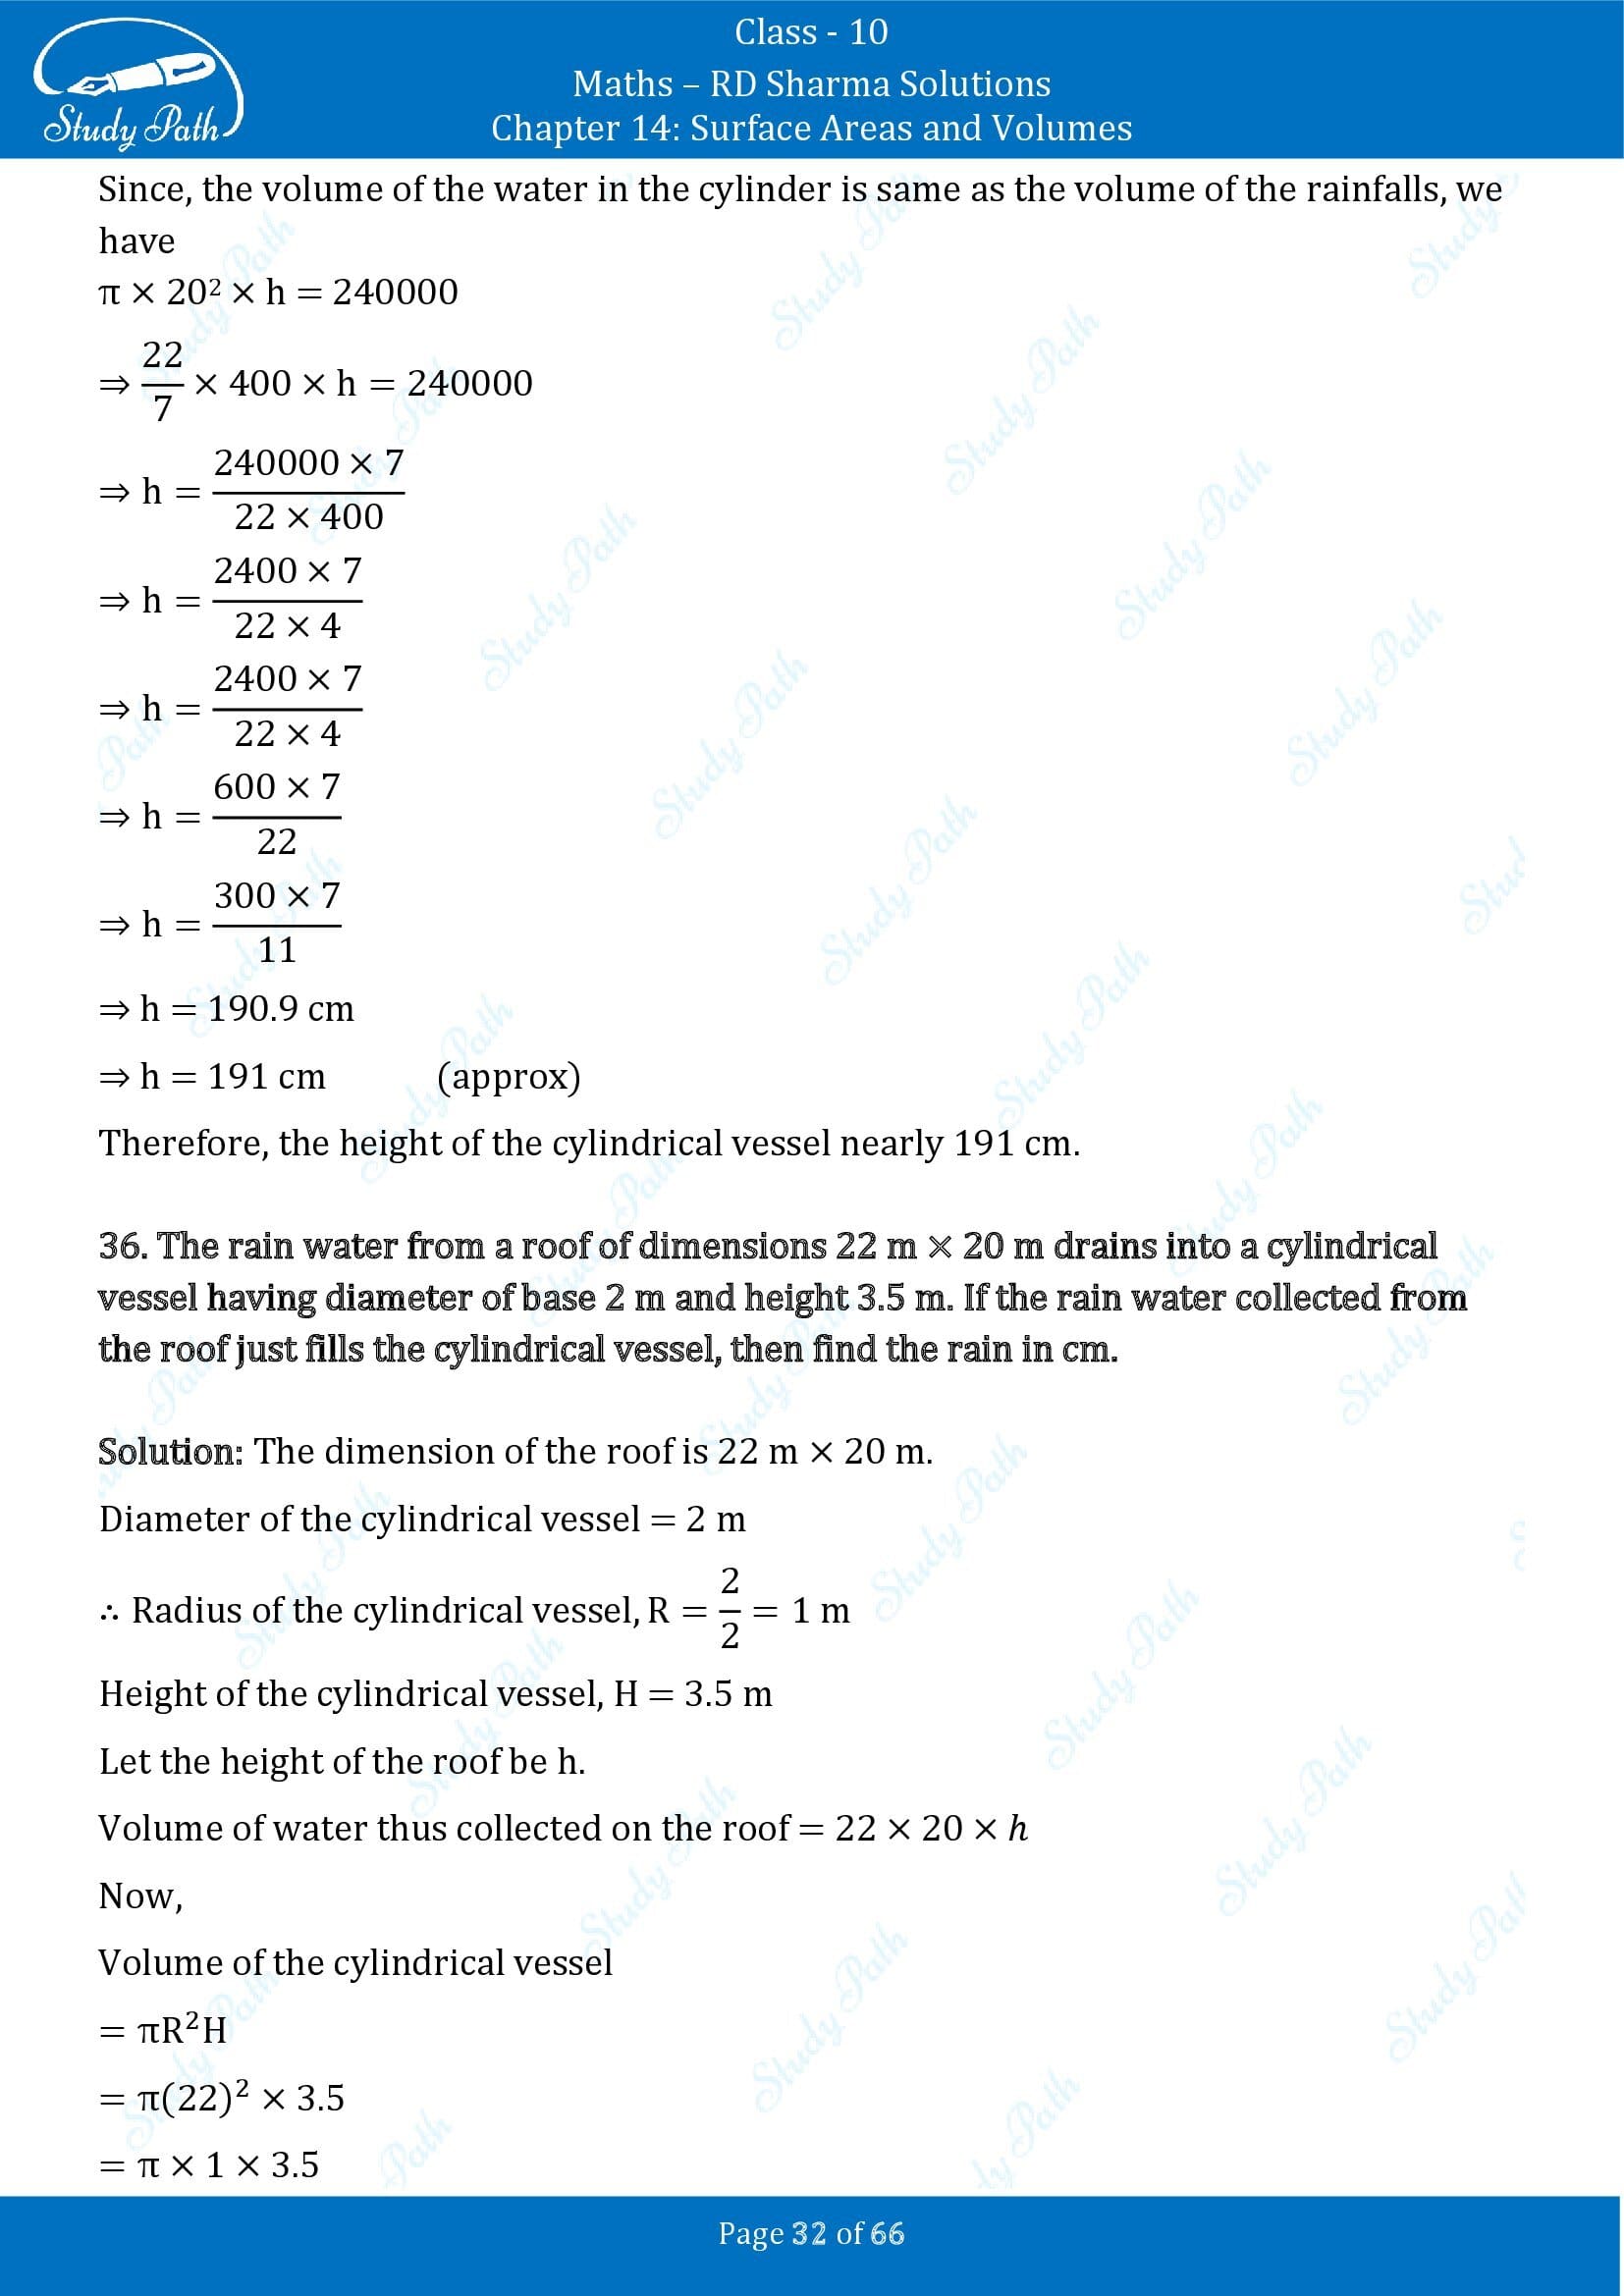 RD Sharma Solutions Class 10 Chapter 14 Surface Areas and Volumes Exercise 14.1 00032